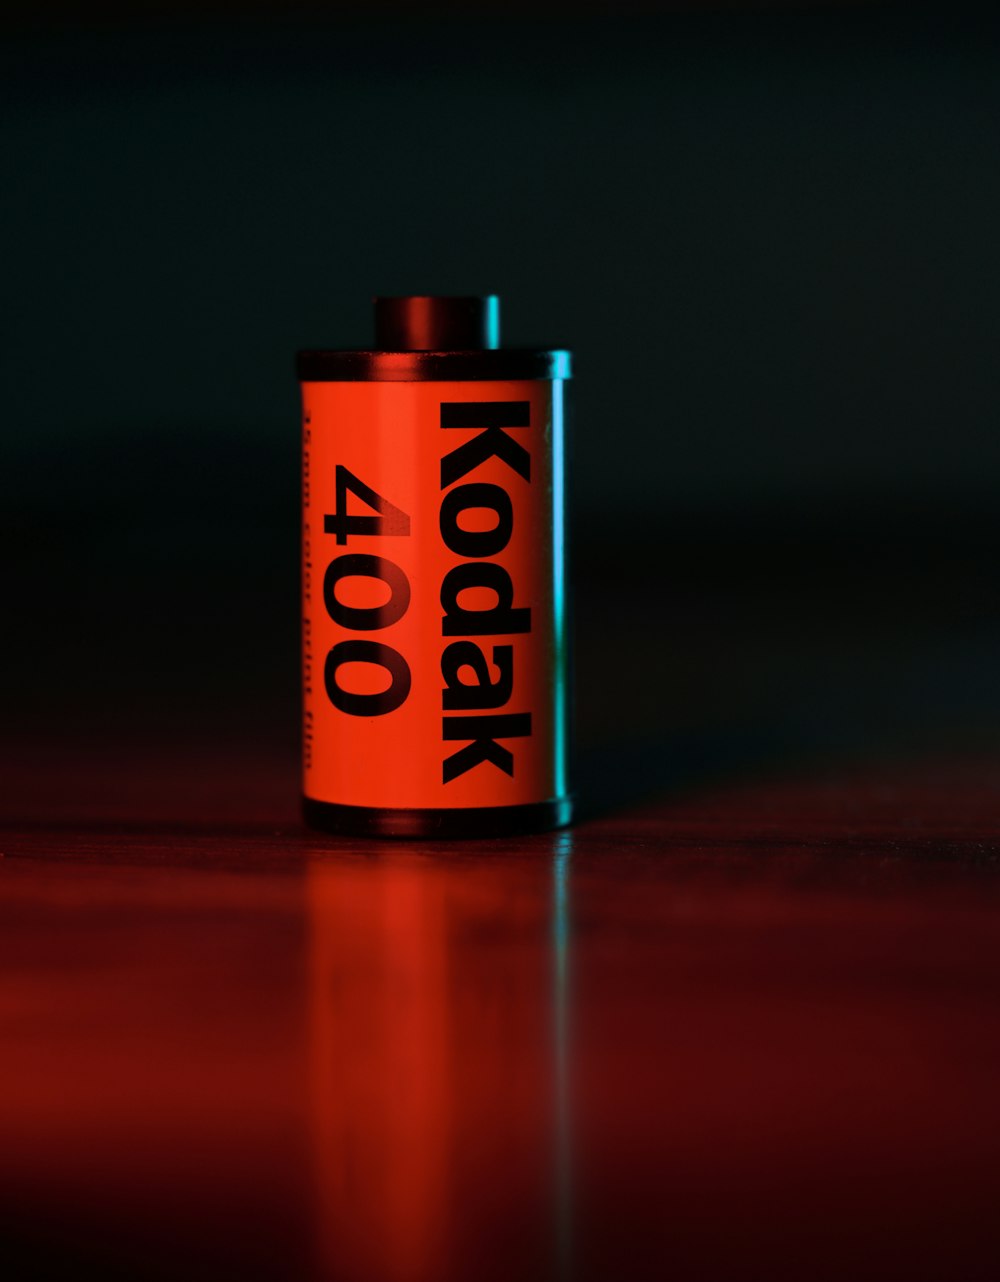 a close up of a can of kodak on a table